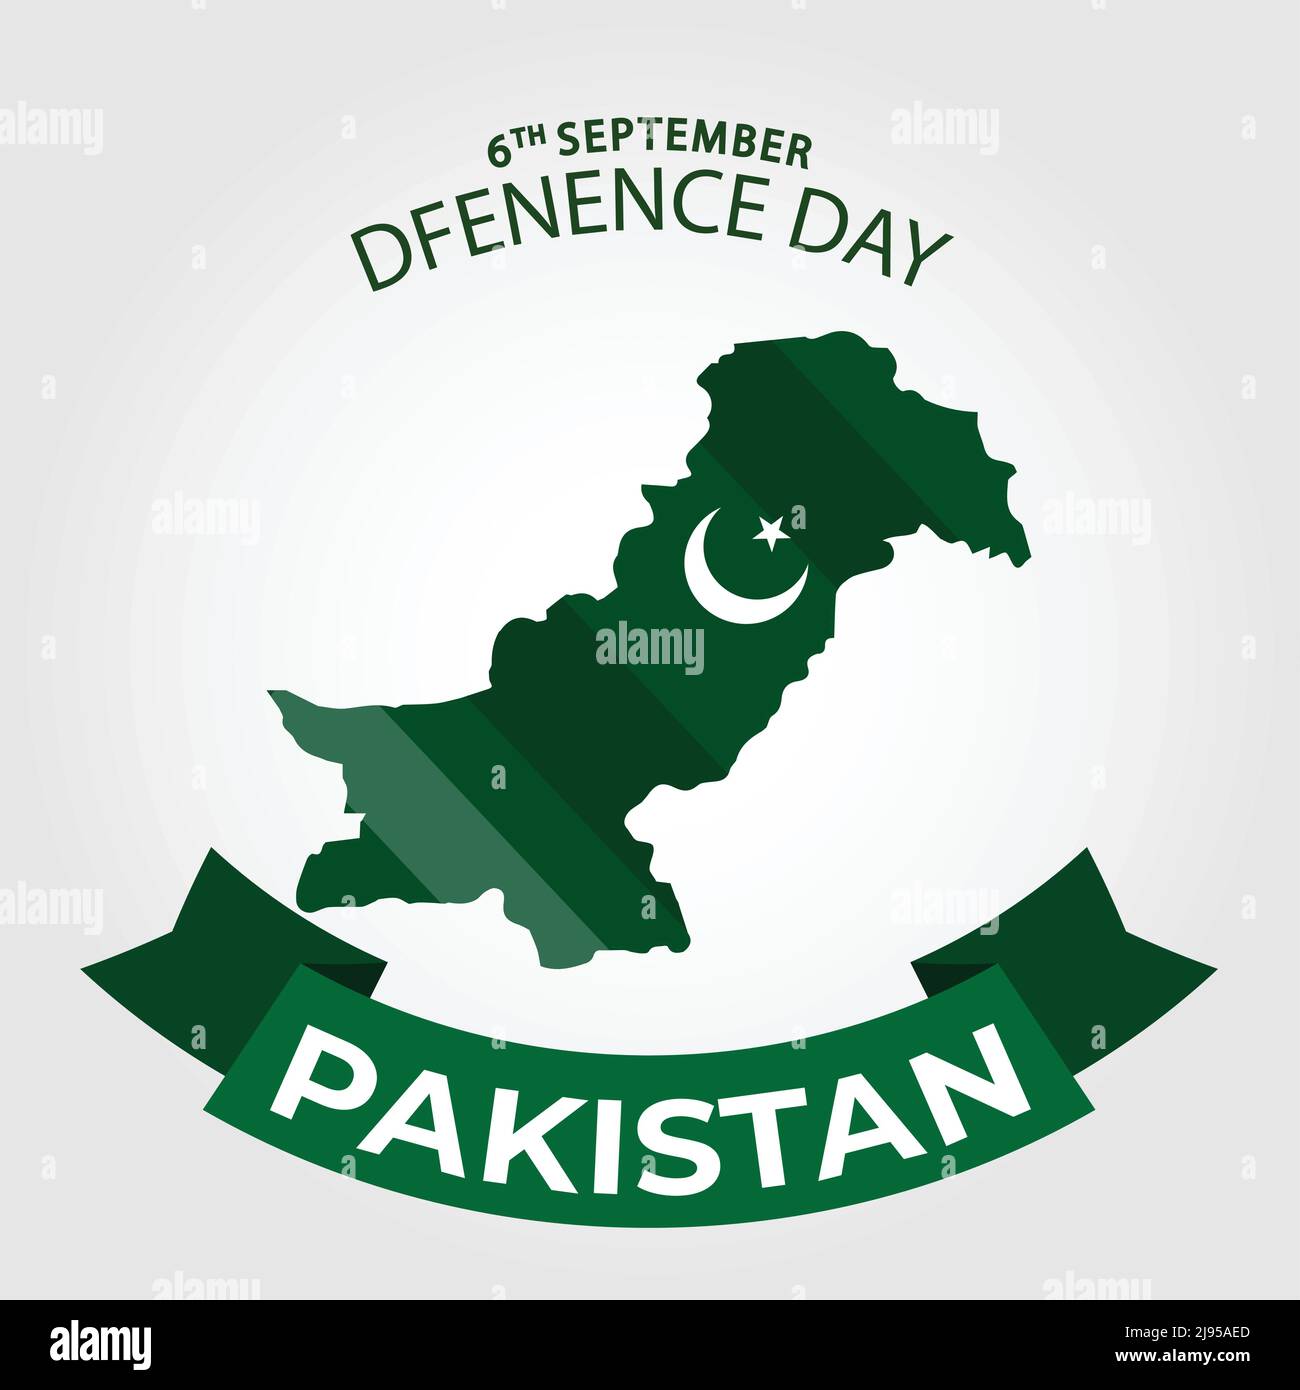 Pakistan defense day with flag and map on white background Stock Vector